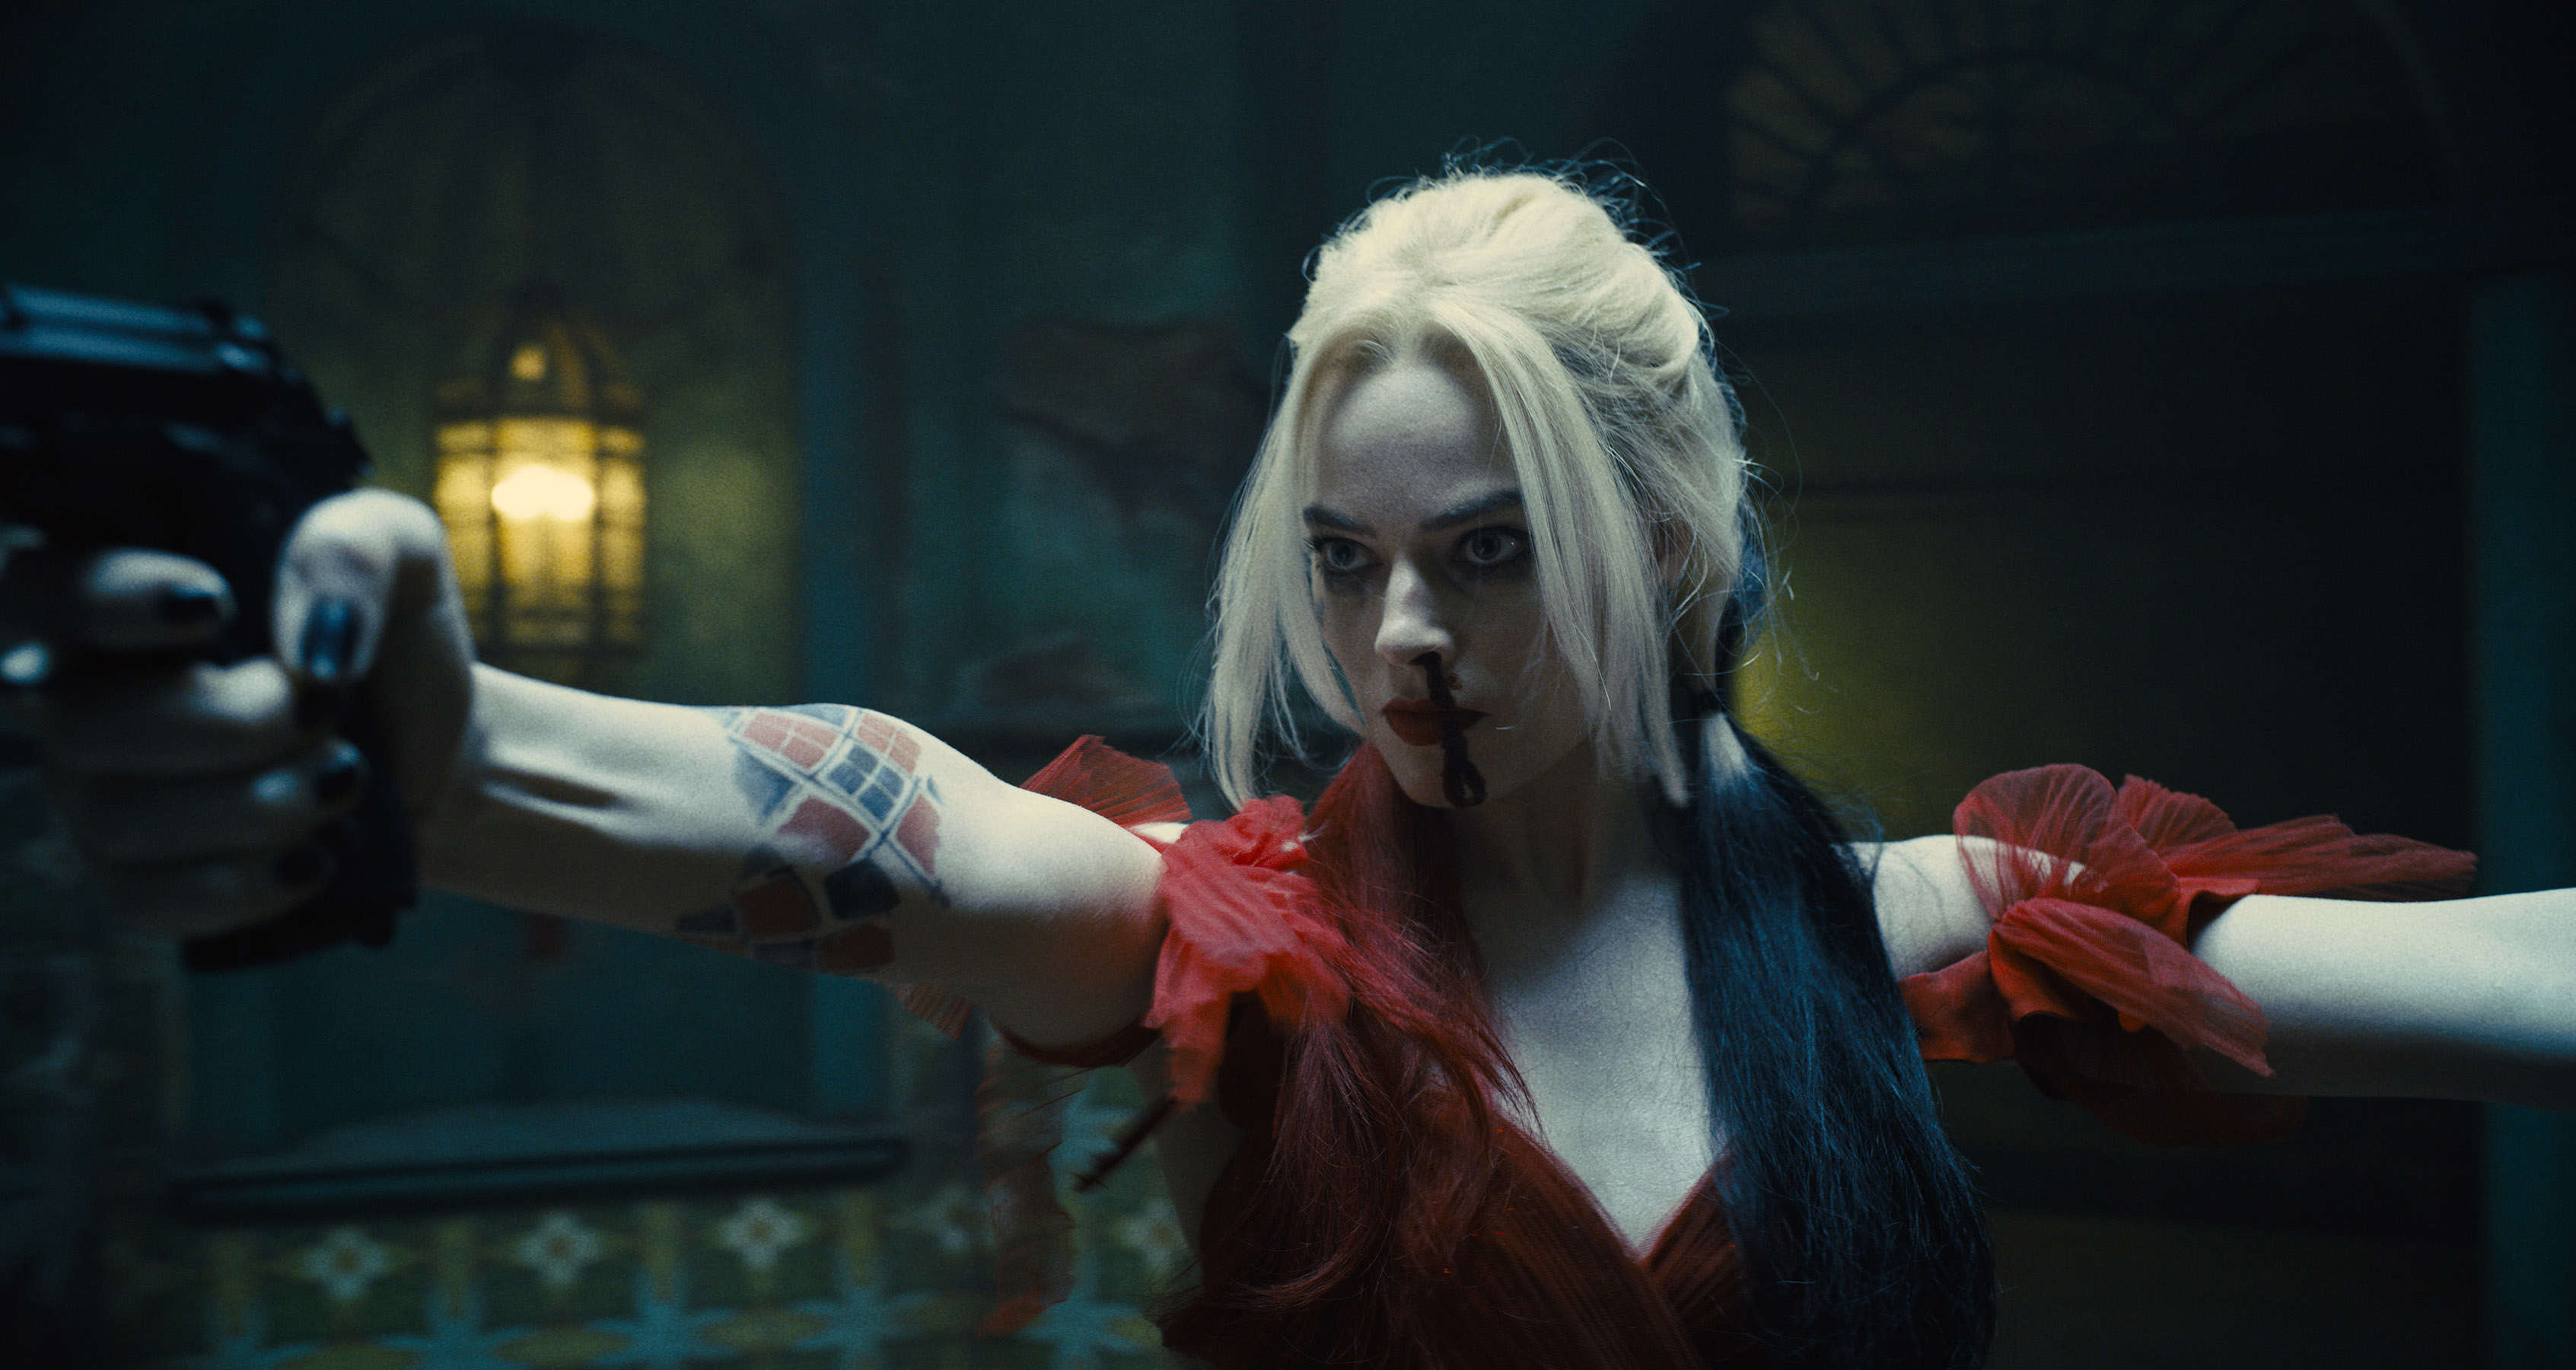 Margot Robbie's Harley Quinn Character From “Suicide Squad” Is